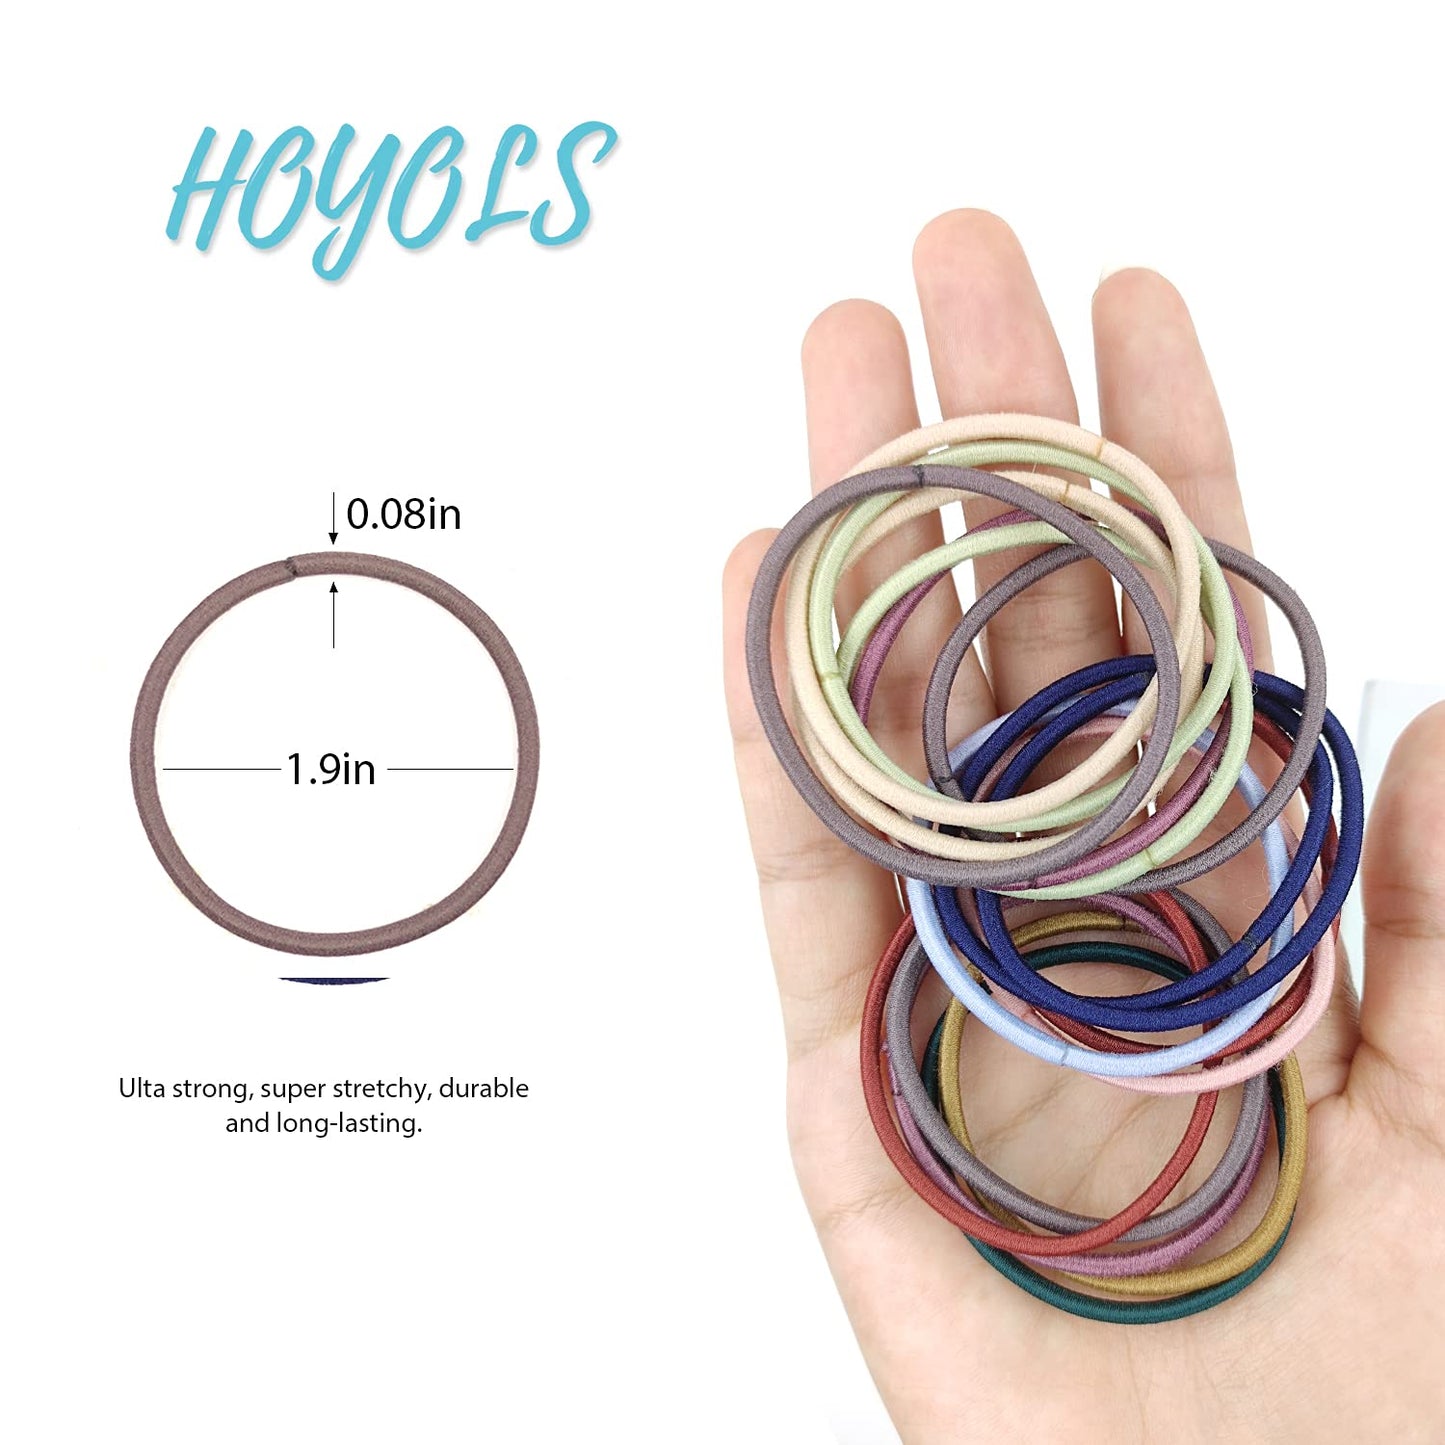 HOYOLS Hair Elastics Bands Assorted Color Black White for Women Girl Kids Fine Curly Thin Hair, No Metal Ponytail Holder Hair Ties Accessories Gentle Hold No Snag 2mm 80 Count